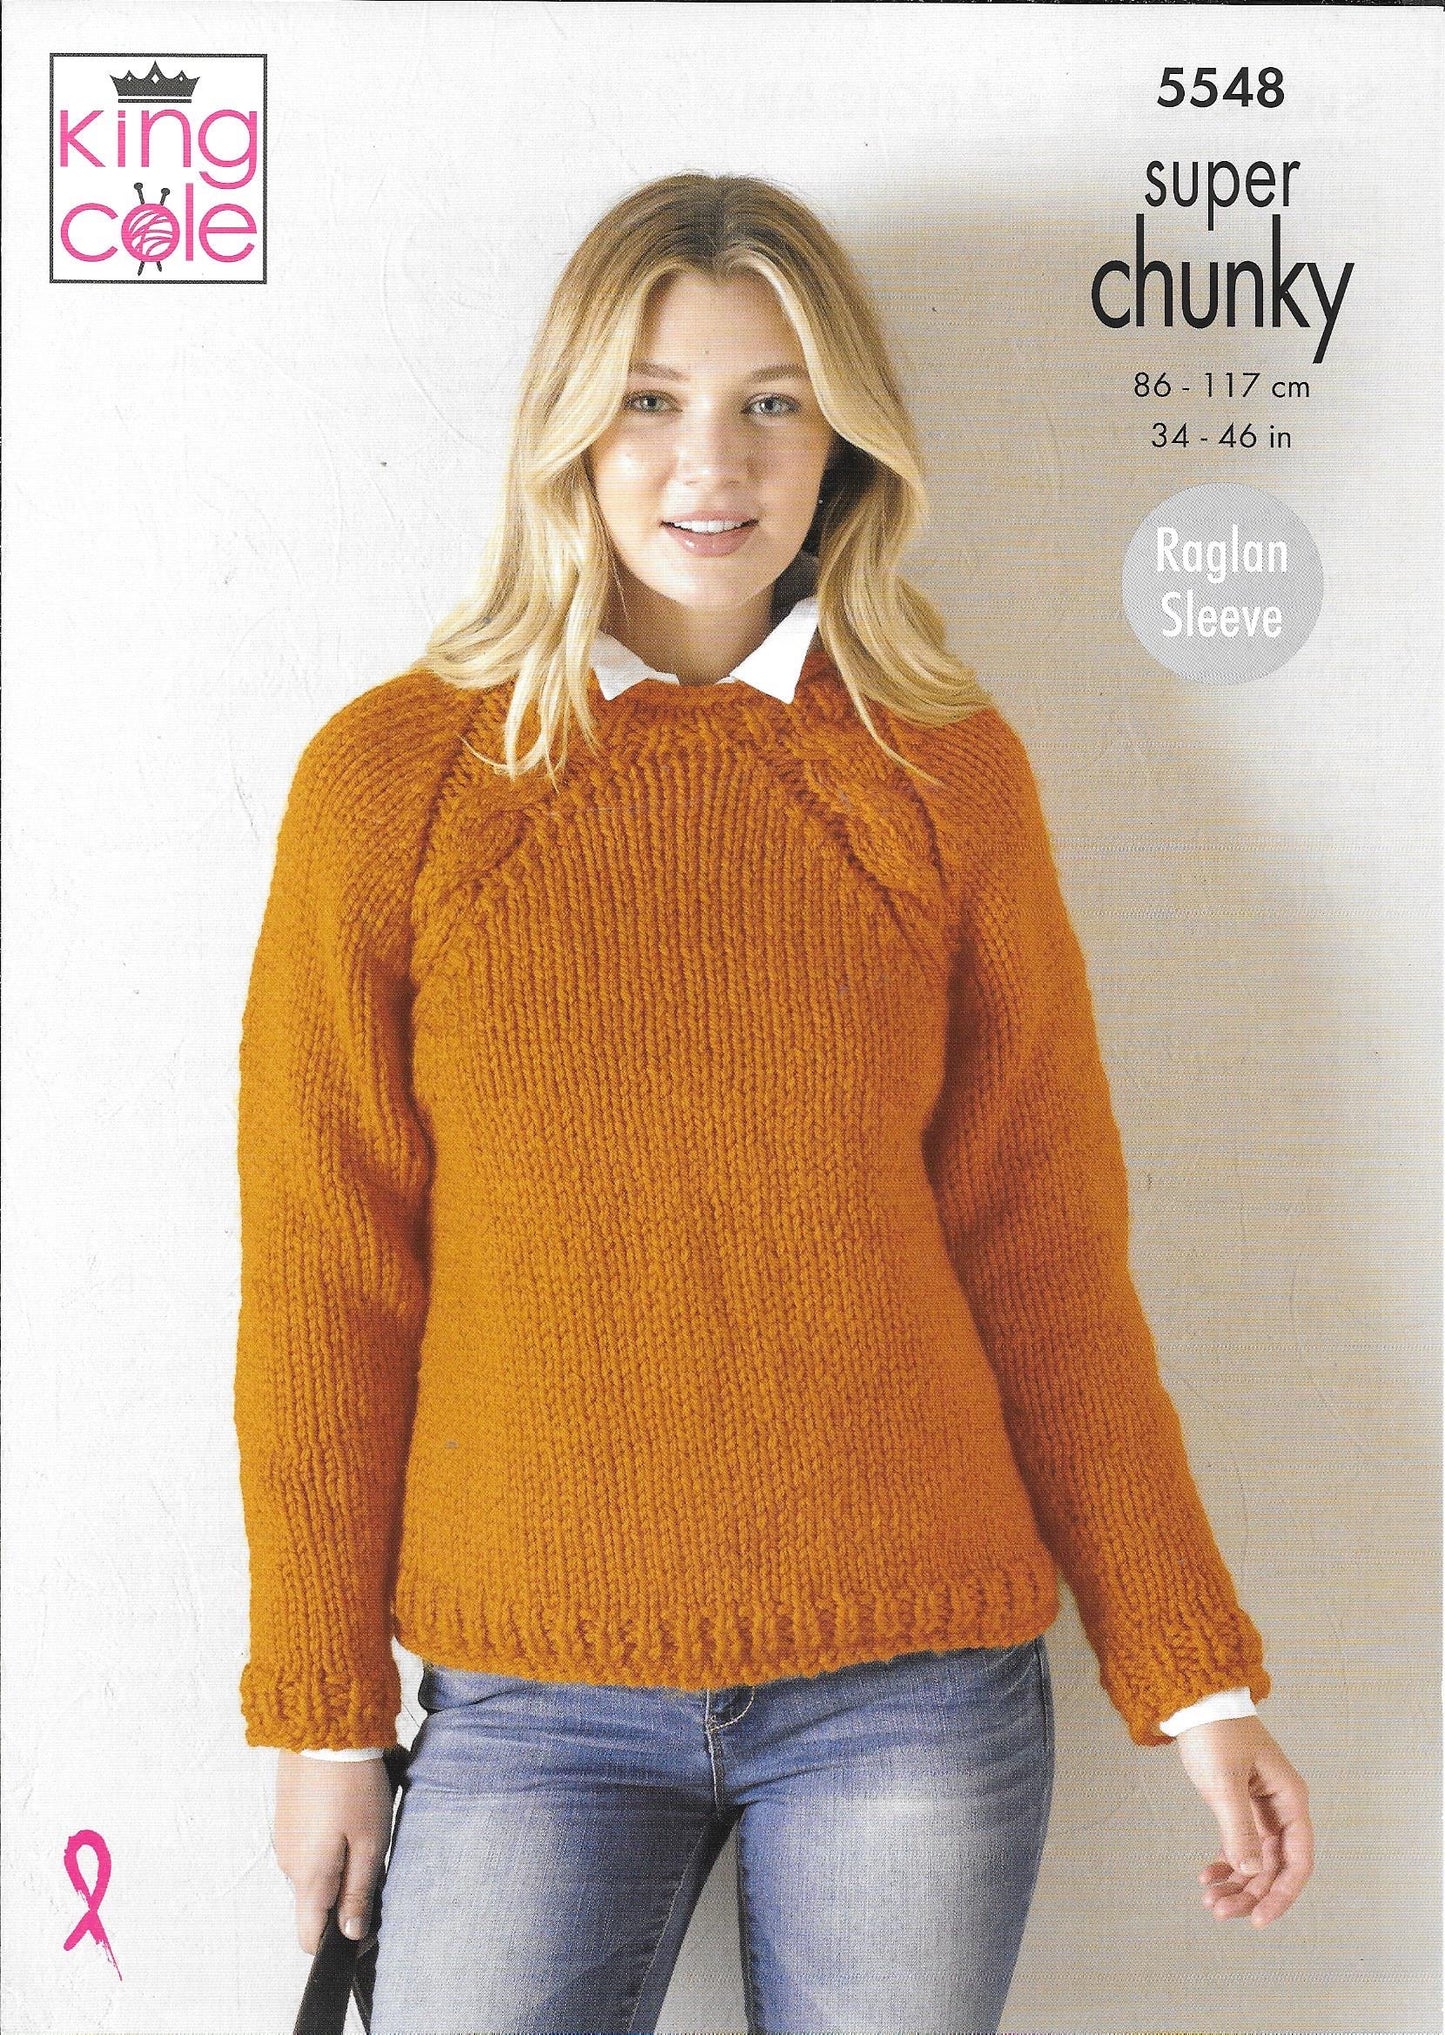 5548 King Cole Super Chunky ladies cardigan and sweater knitting pattern